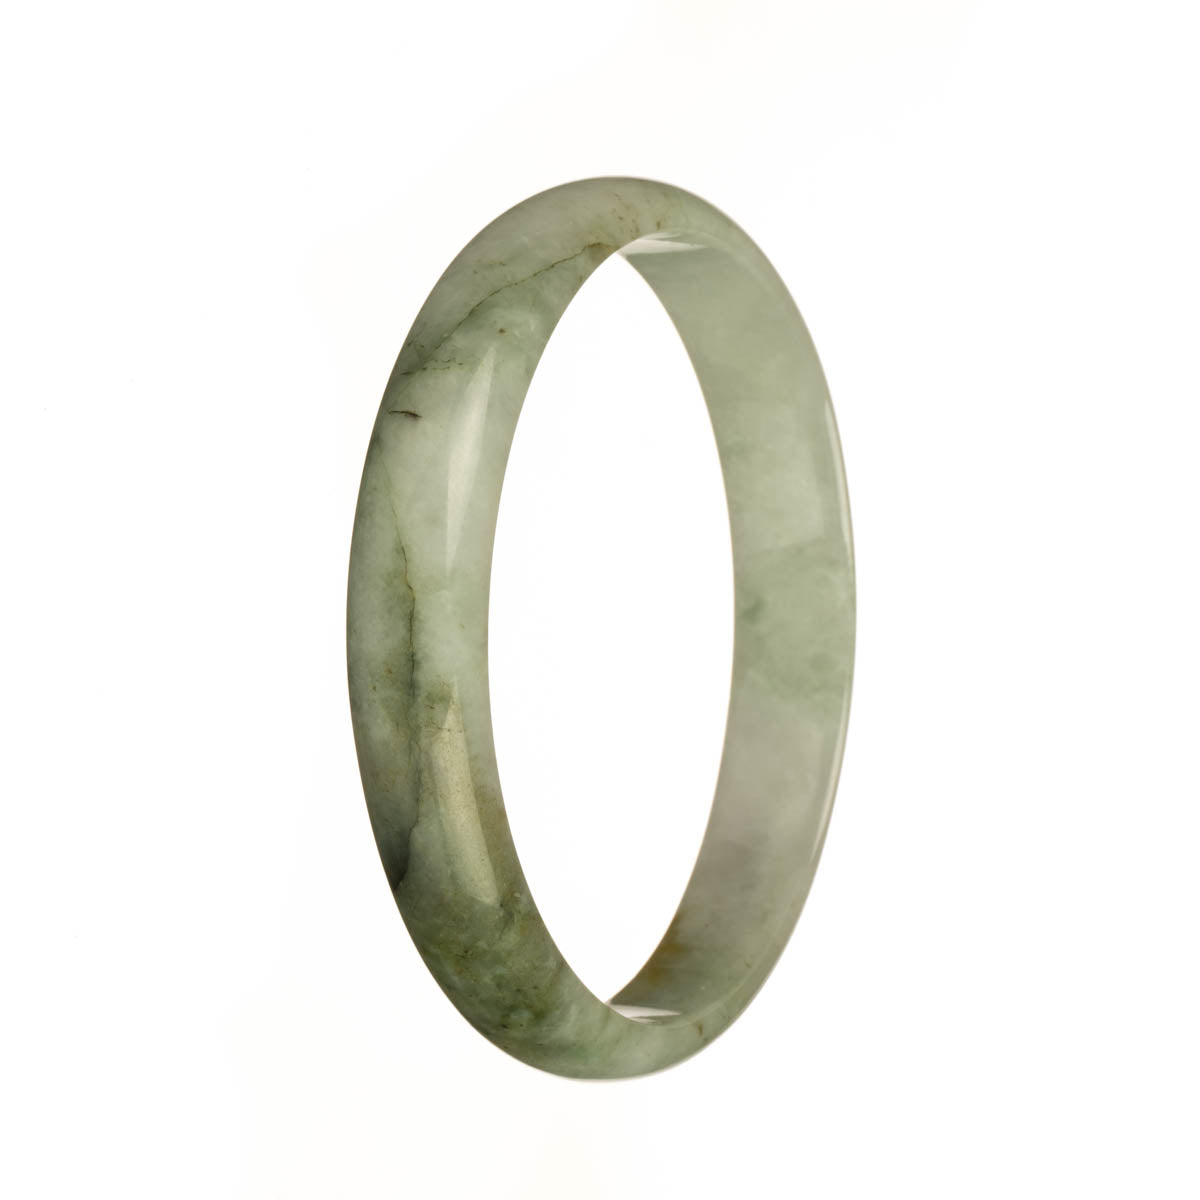 76.2mm White with Olive Green and BrownPatterns Jade Bangle Bracelet